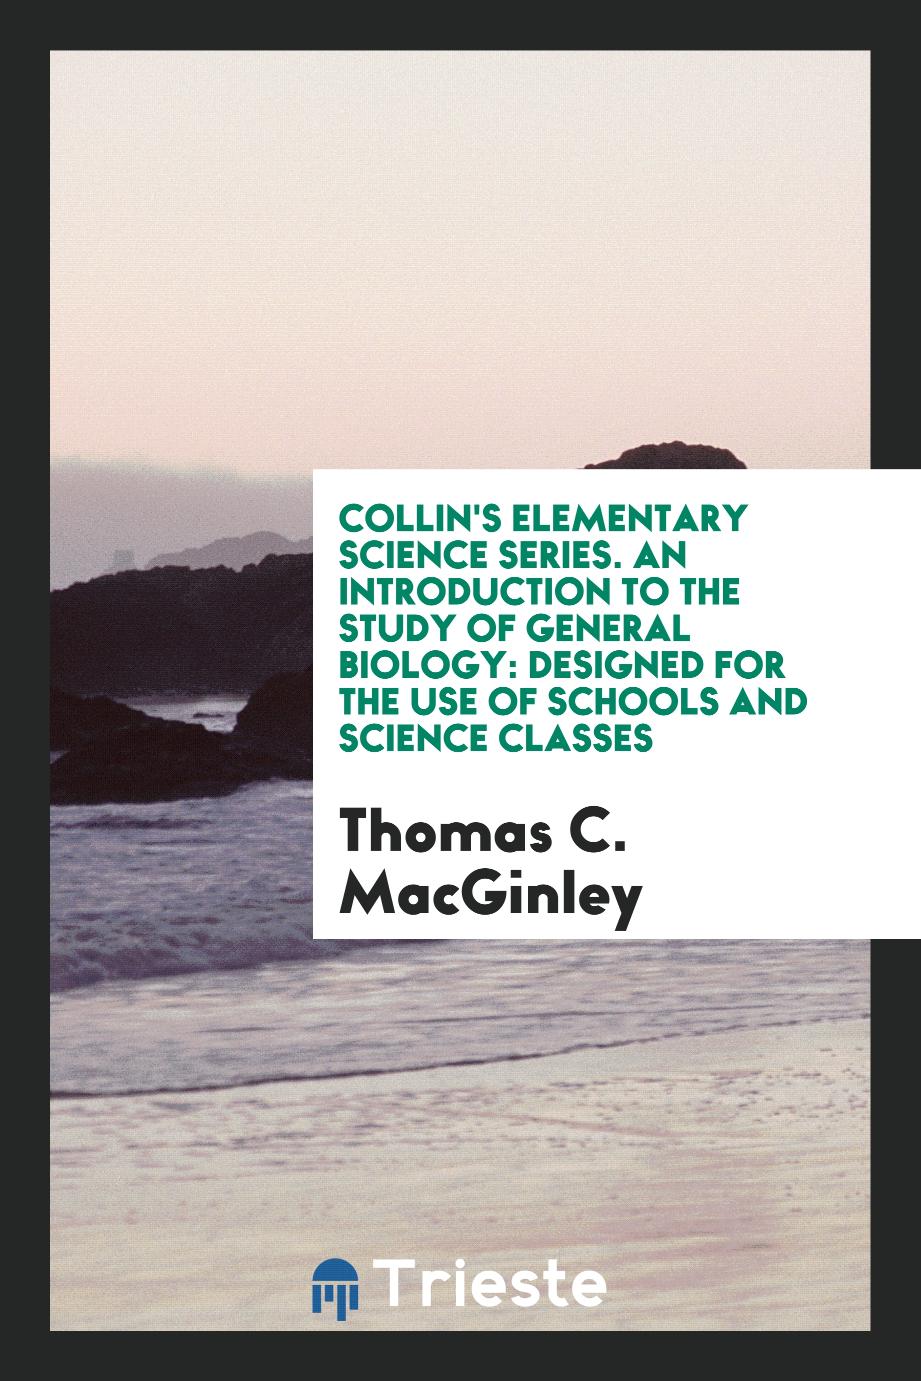 Collin's Elementary Science Series. An Introduction to the Study of General Biology: Designed for the Use of Schools and Science Classes